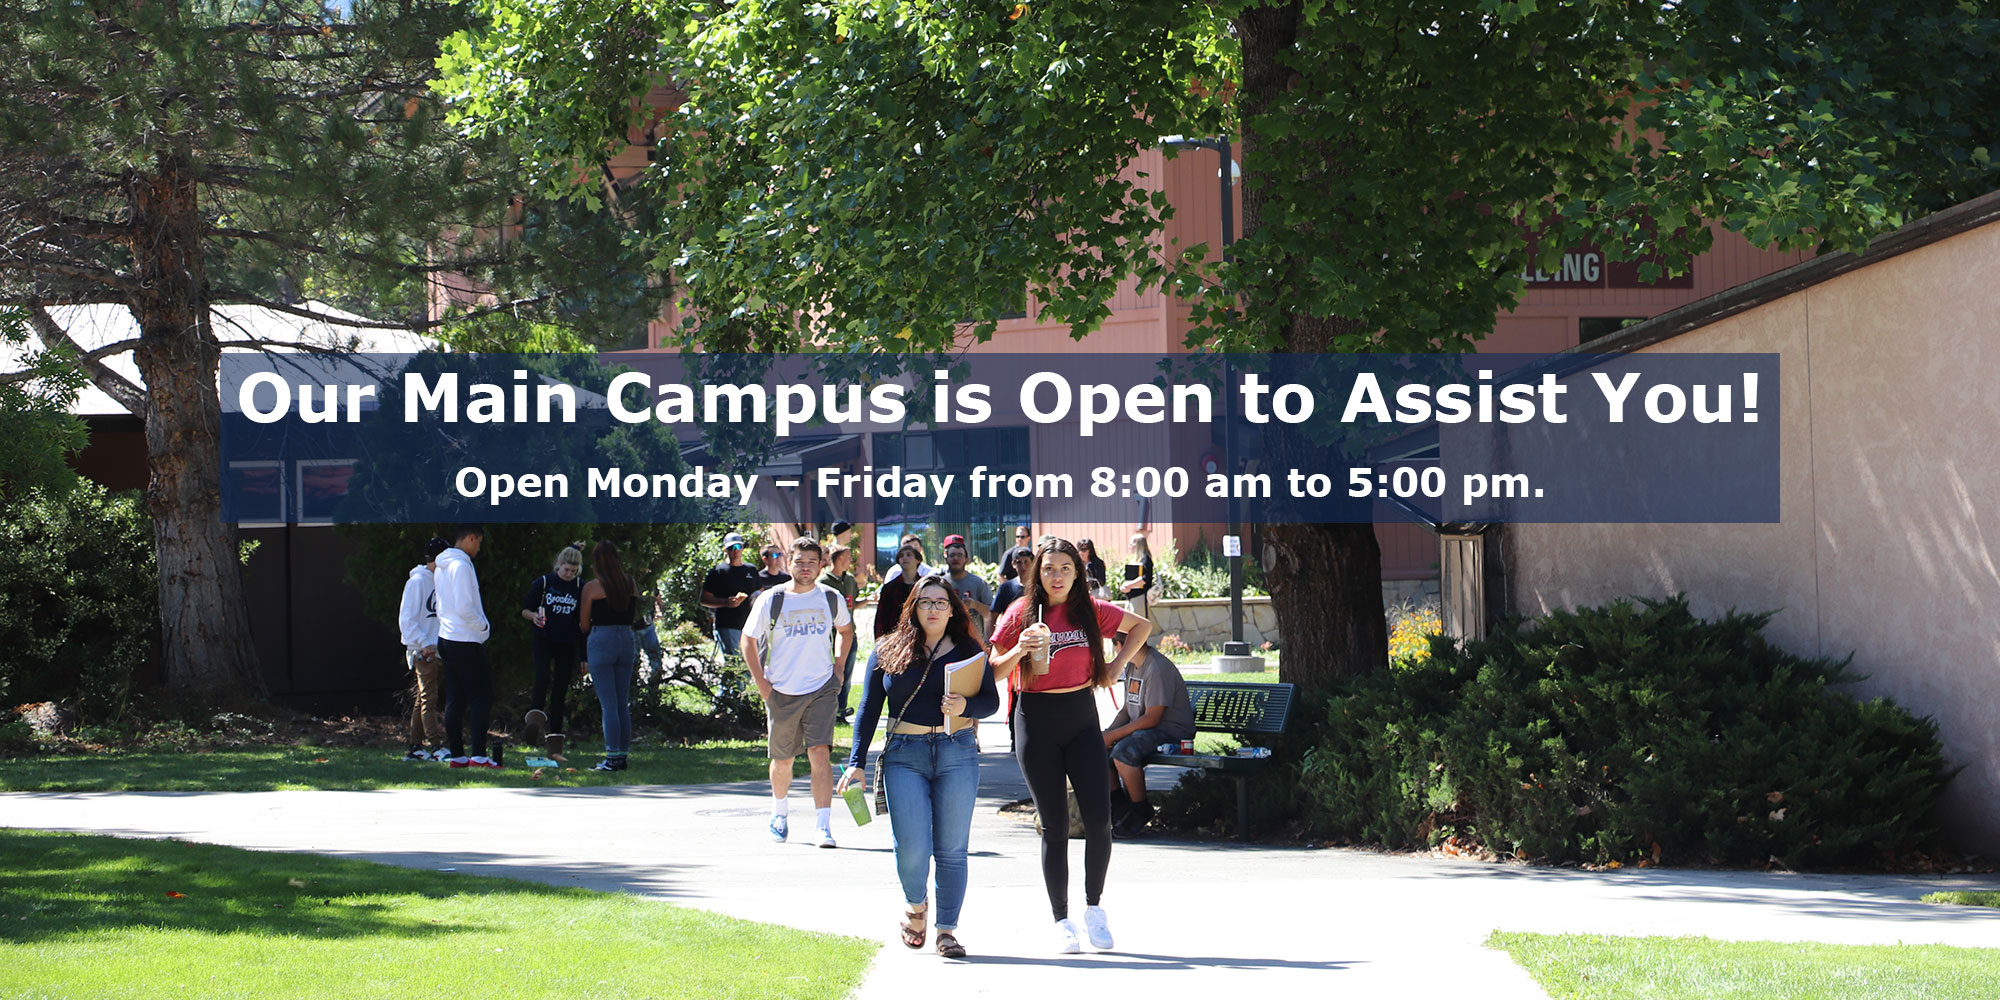 Our Main Campus is Open to Assist You! Open Monday - Friday from 8:00 am to 5:00 pm.